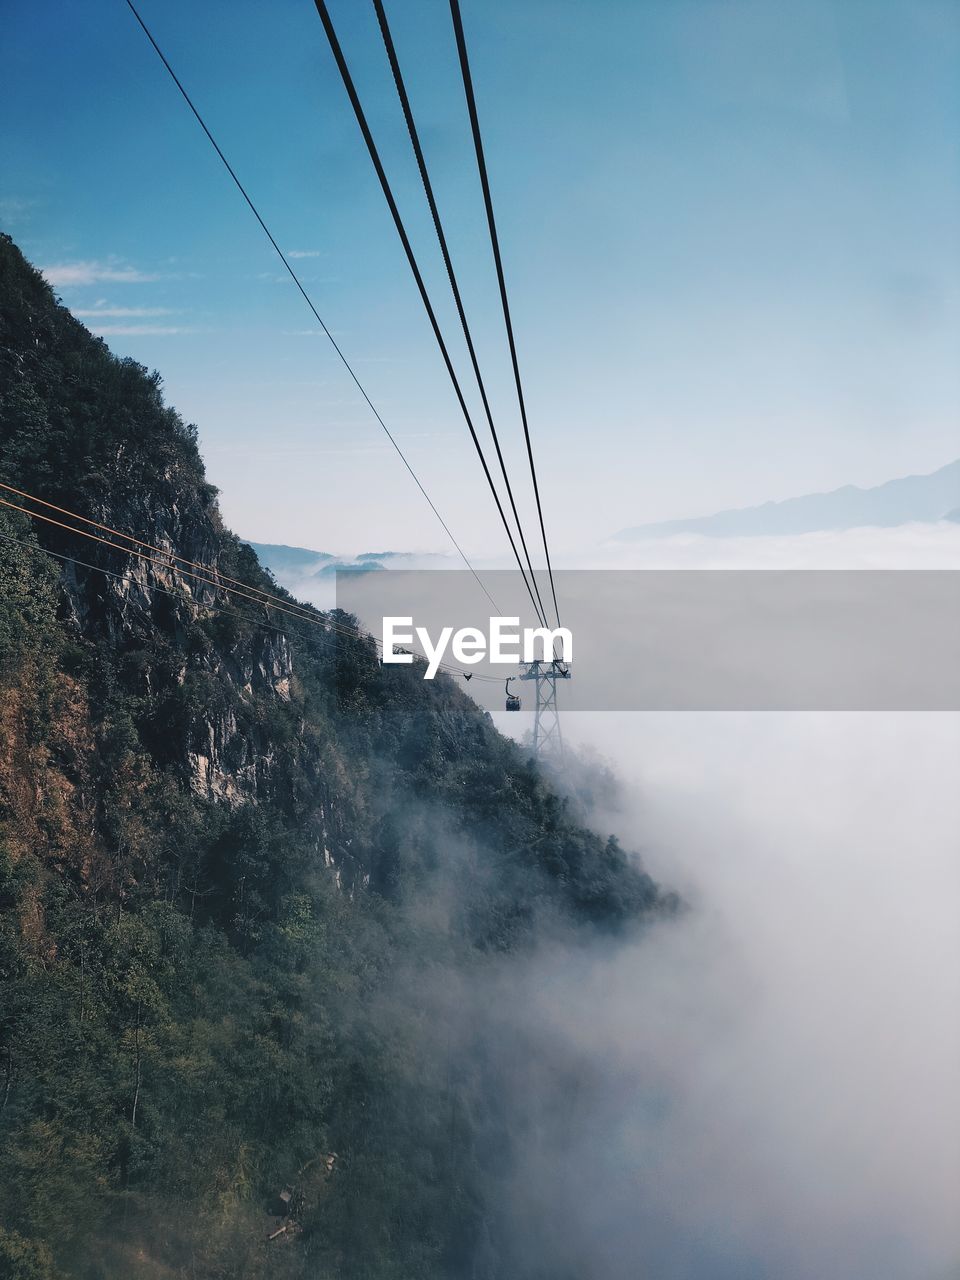 sky, mountain, cable, nature, cloud, scenics - nature, environment, electricity, landscape, beauty in nature, mountain range, no people, fog, land, travel, transportation, outdoors, technology, day, travel destinations, tranquil scene, tranquility, blue, cable car, power line, non-urban scene, power supply, rock, morning, sunlight